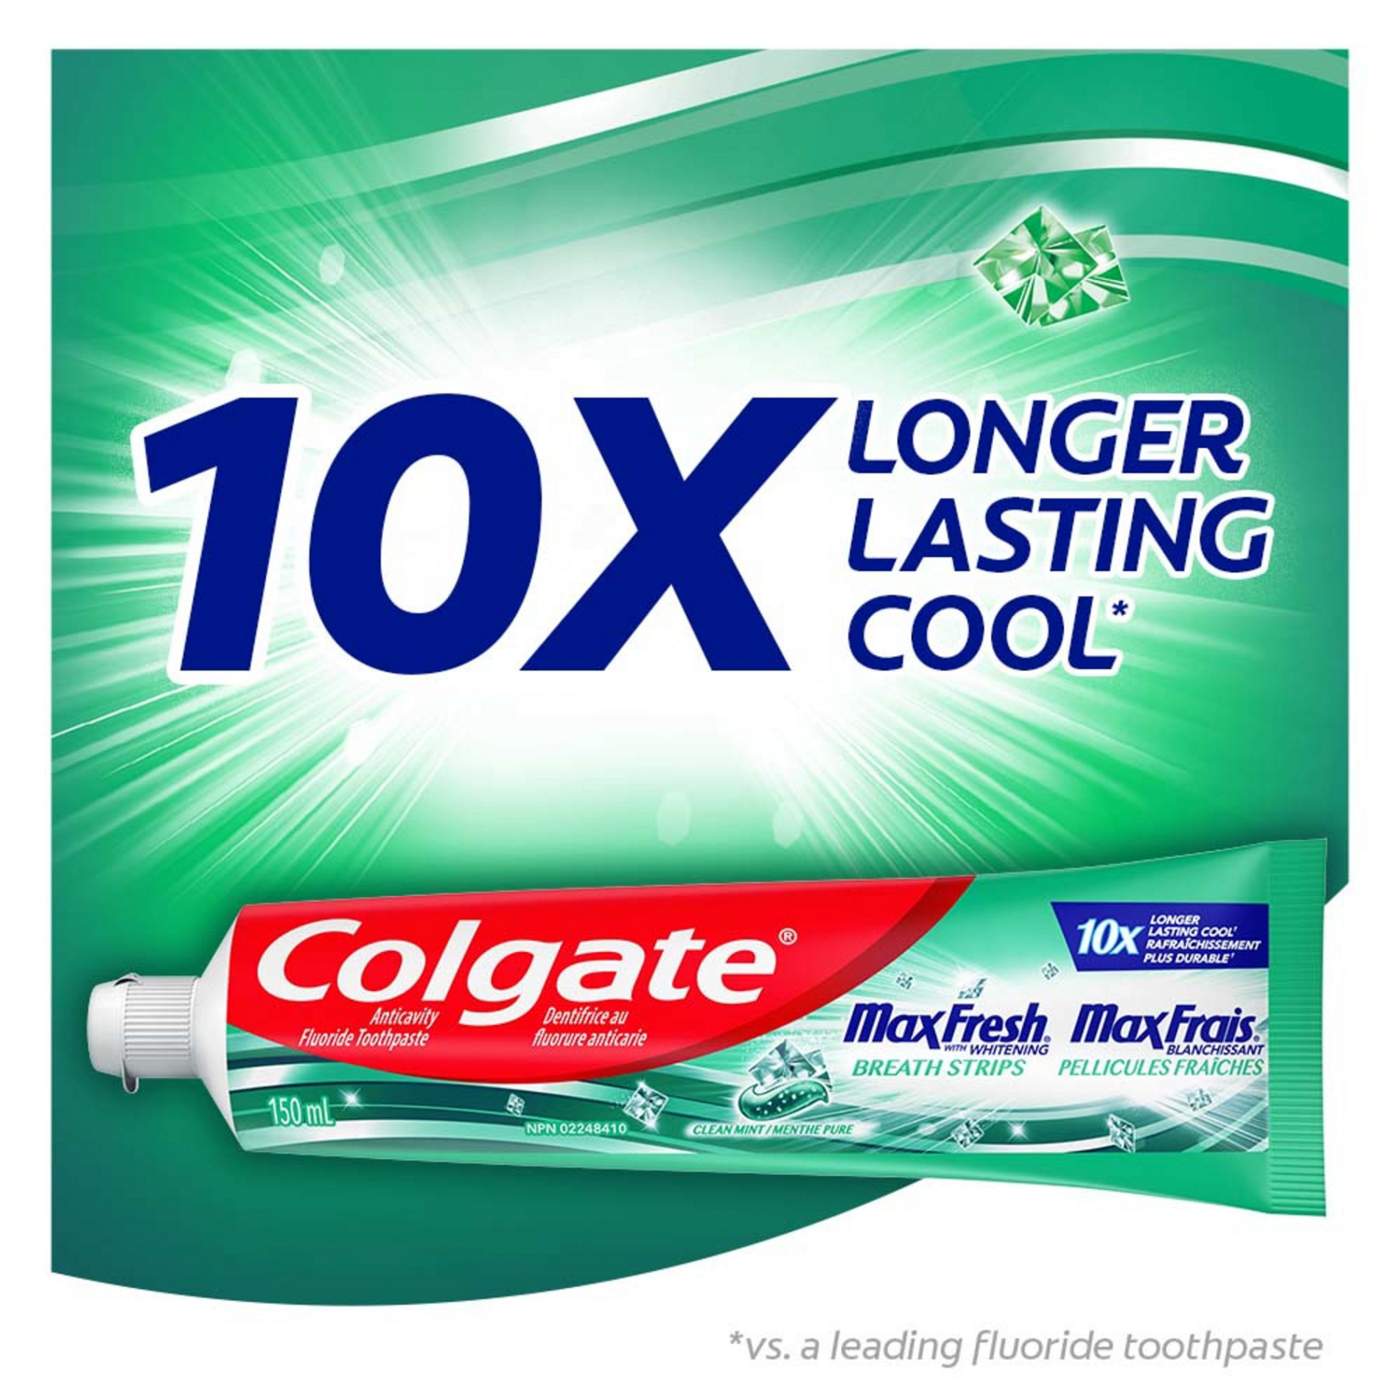 Colgate Max Fresh Anticavity Toothpaste 2 pk - Clean Mint; image 7 of 7